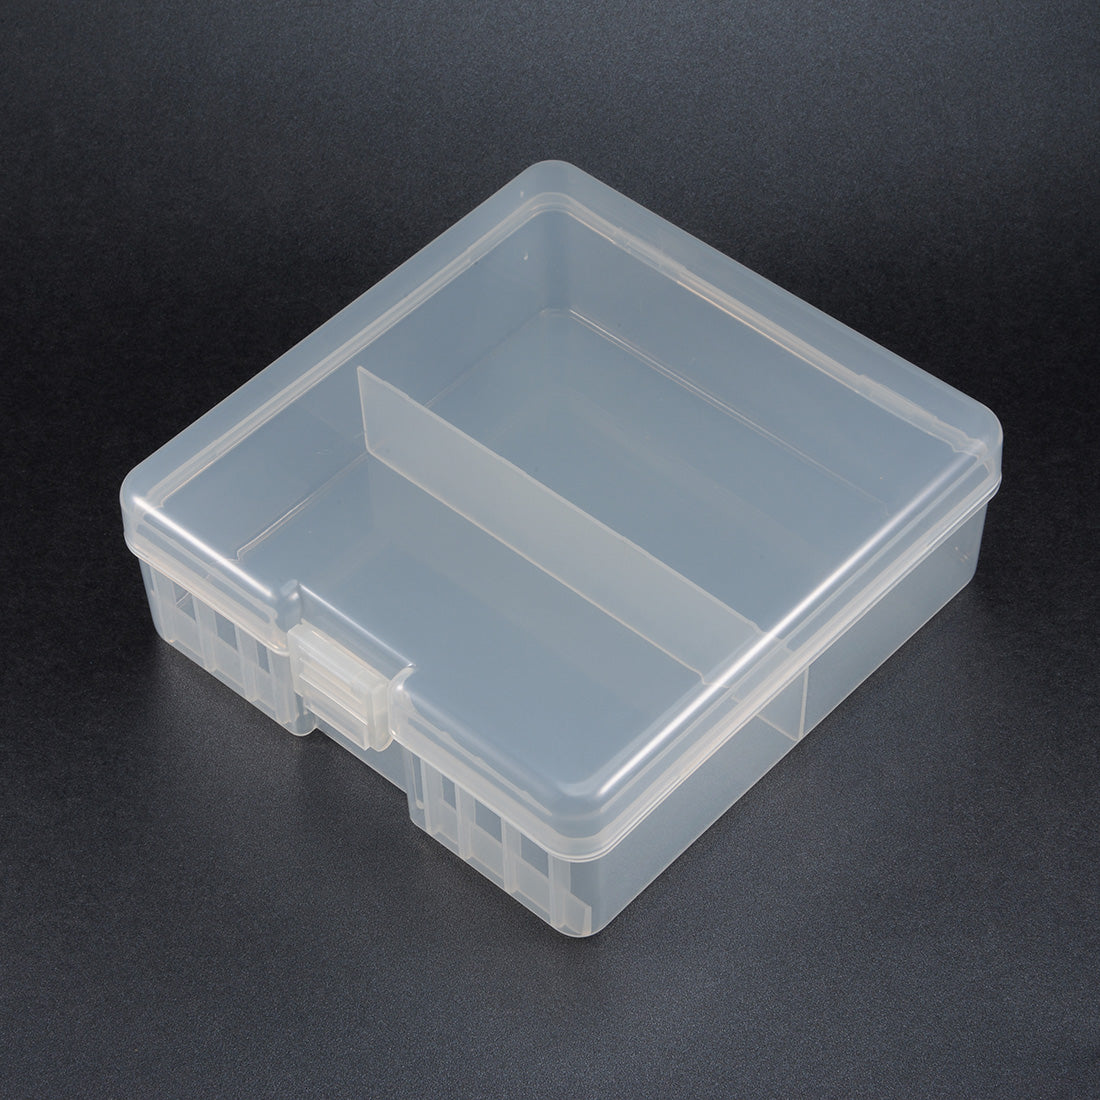 uxcell Uxcell Portable Battery Storage Box Protective Container Transparent for AAA/AA/C/D/9V batteries.